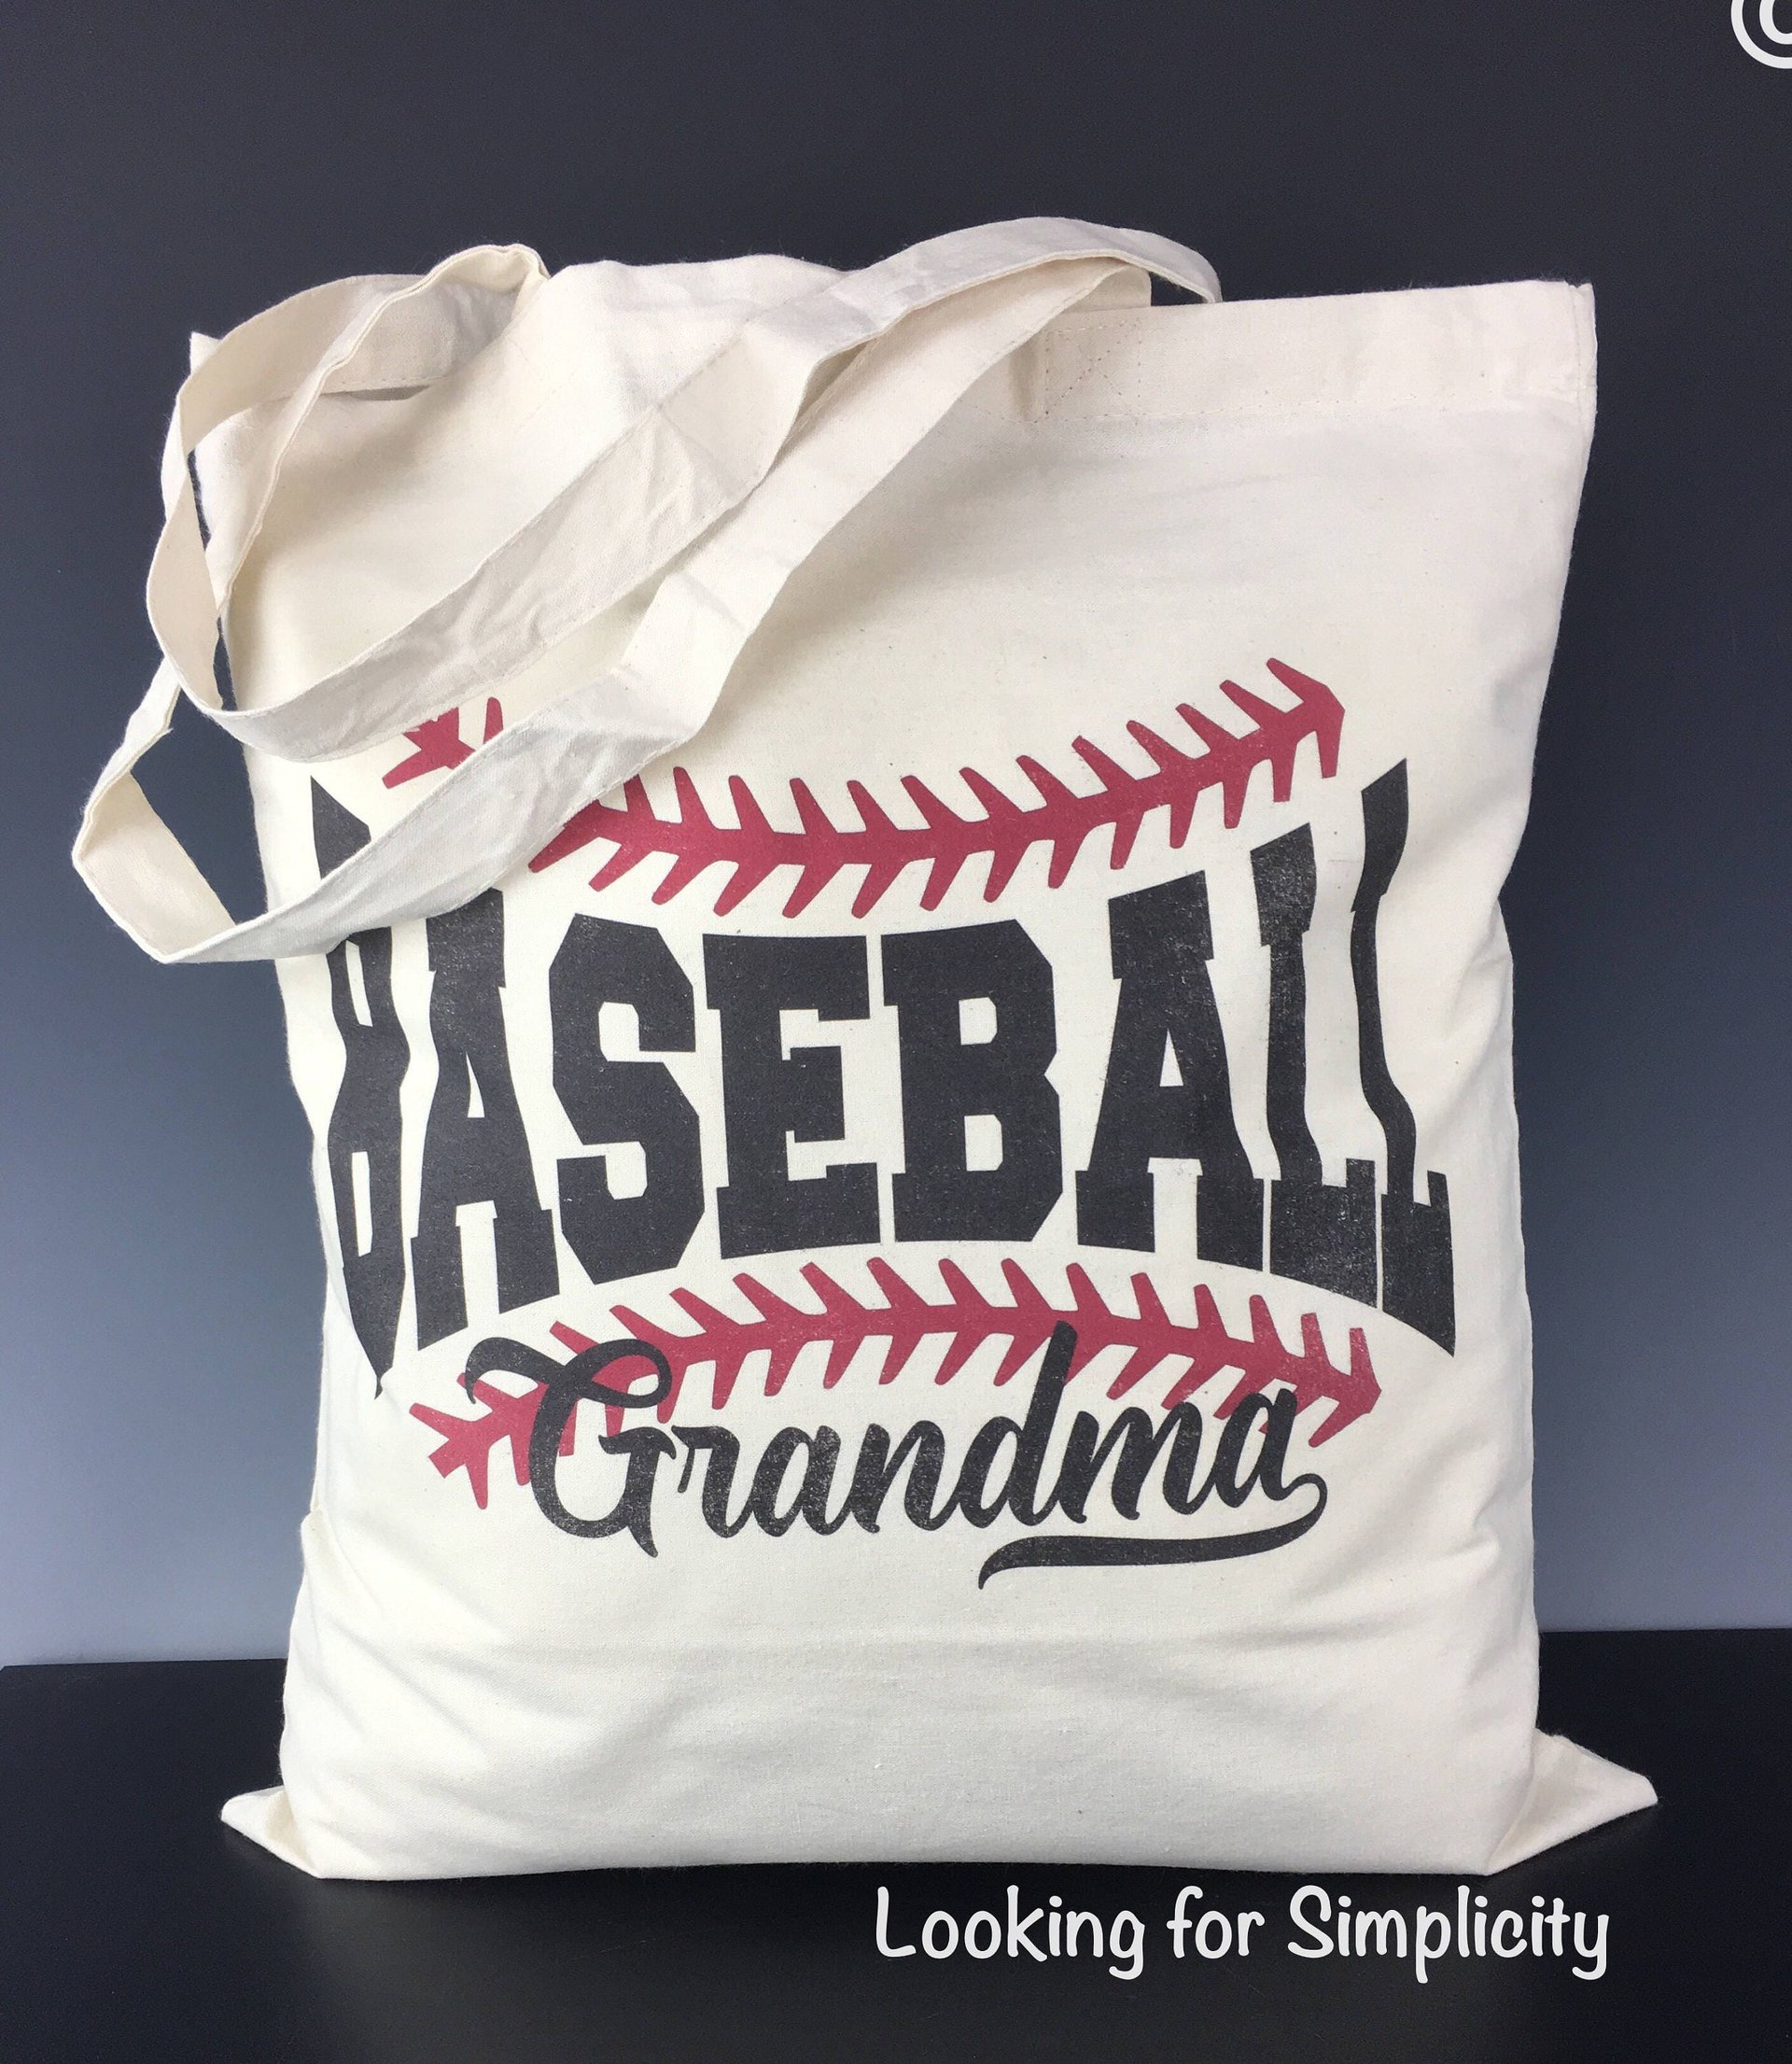 Baseball Mom, Aunt, Grandma, Nana, Meme, Mimi Sister, Dad, Uncle, Grandpa, Brother (or other Relation/Text) distressed Tote Bag